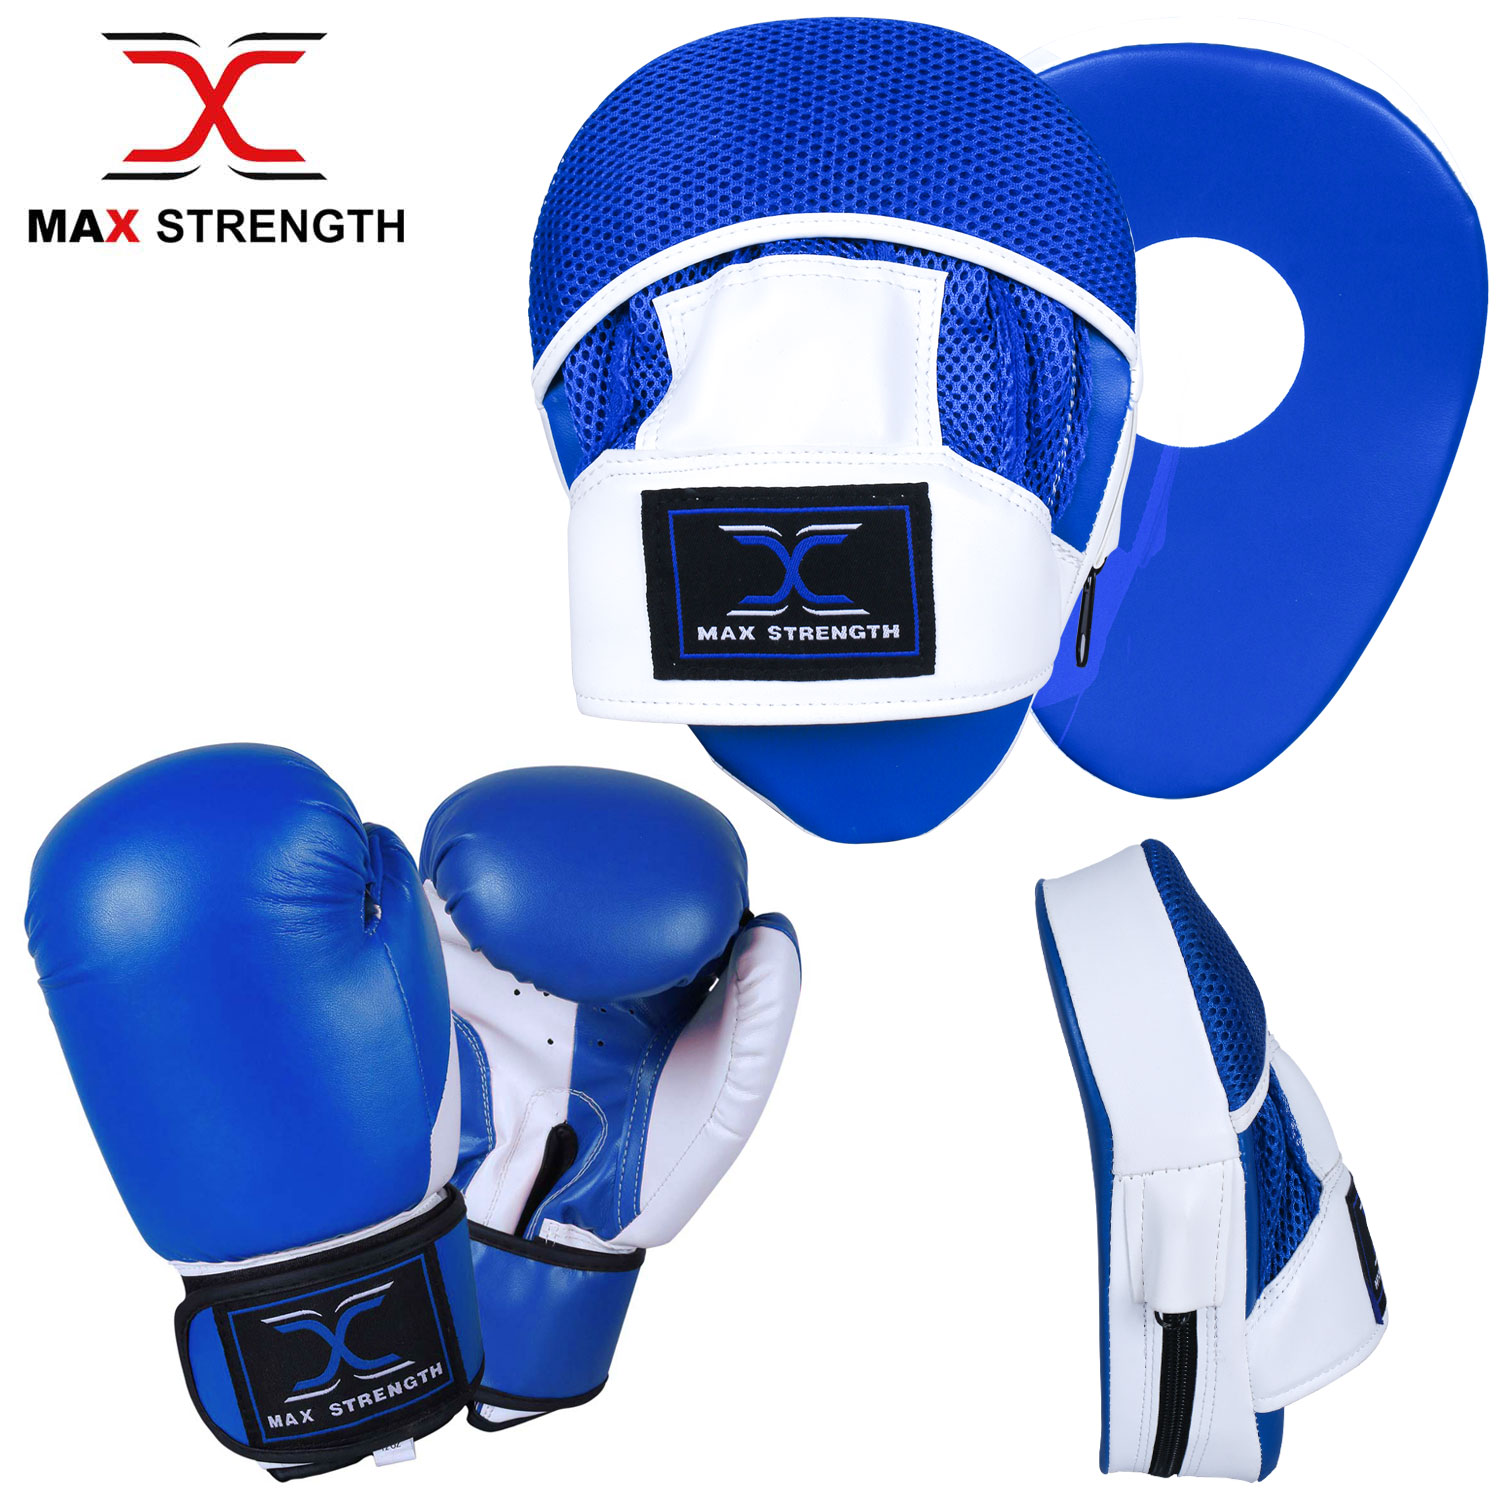 MAXSTRENGTH Curved Focus Pad and Boxing Gloves Set Hook And Jab Martial Arts Training Sparring Kickboxing Muay Thai Punching Gloves